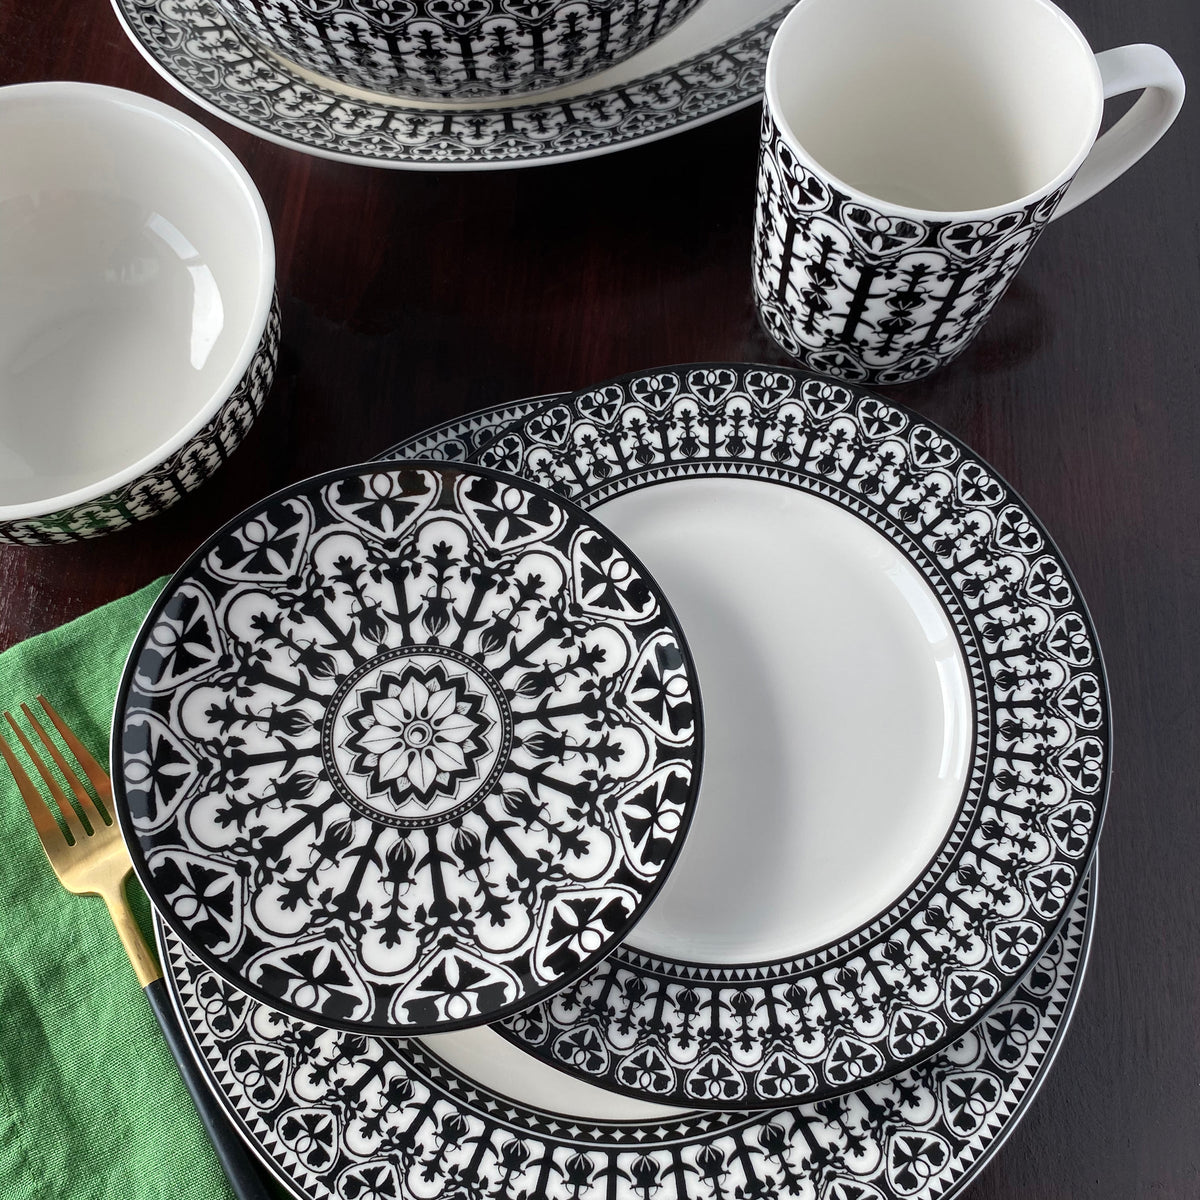 A Casablanca Rimmed Dinner Plate by Caskata Artisanal Home featuring a black and white patterned design is meticulously arranged on a dark wood table with a green napkin and gold fork. Made from high-fired porcelain, the plate is part of a set that includes bowls and a mug.